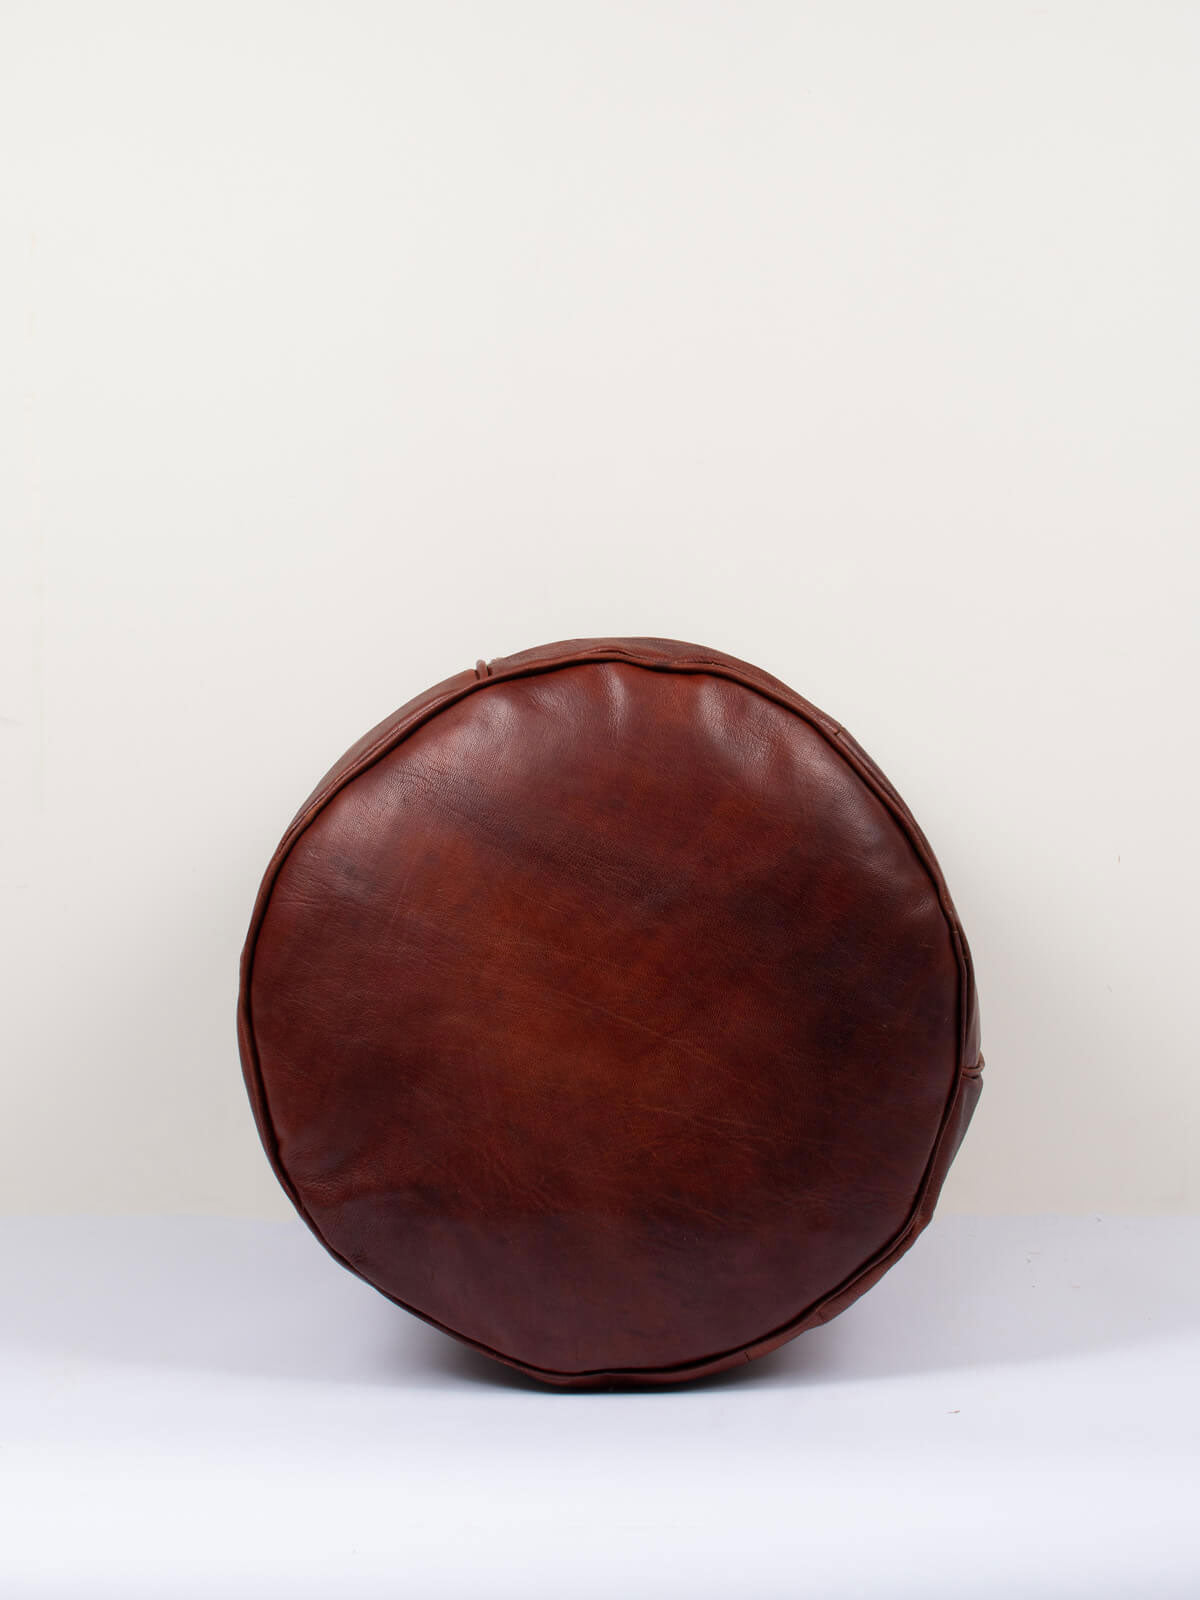 Moroccan Leather Plain Drum Pouffe, Chocolate